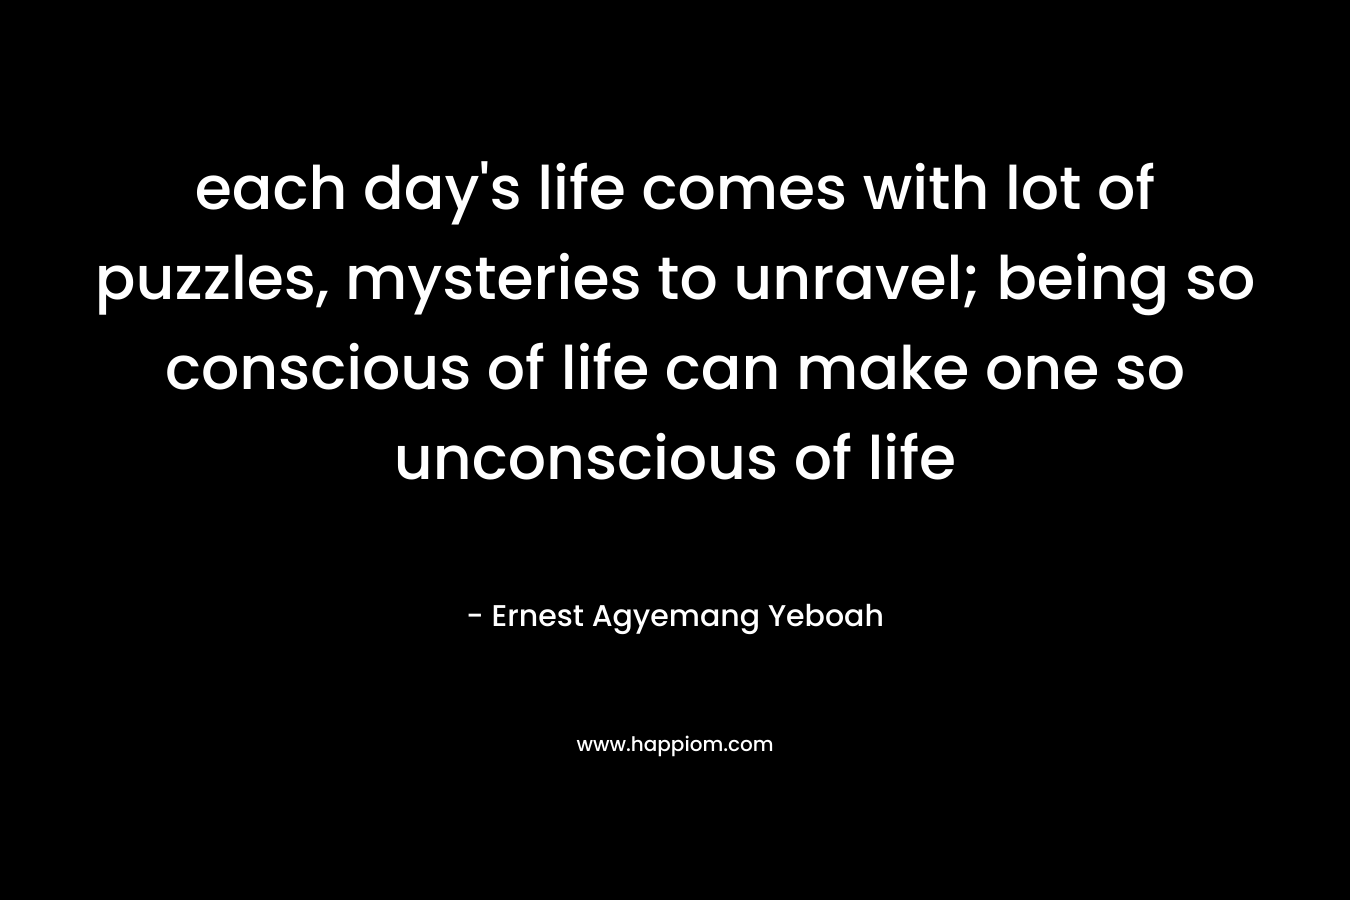 each day’s life comes with lot of puzzles, mysteries to unravel; being so conscious of life can make one so unconscious of life – Ernest Agyemang Yeboah